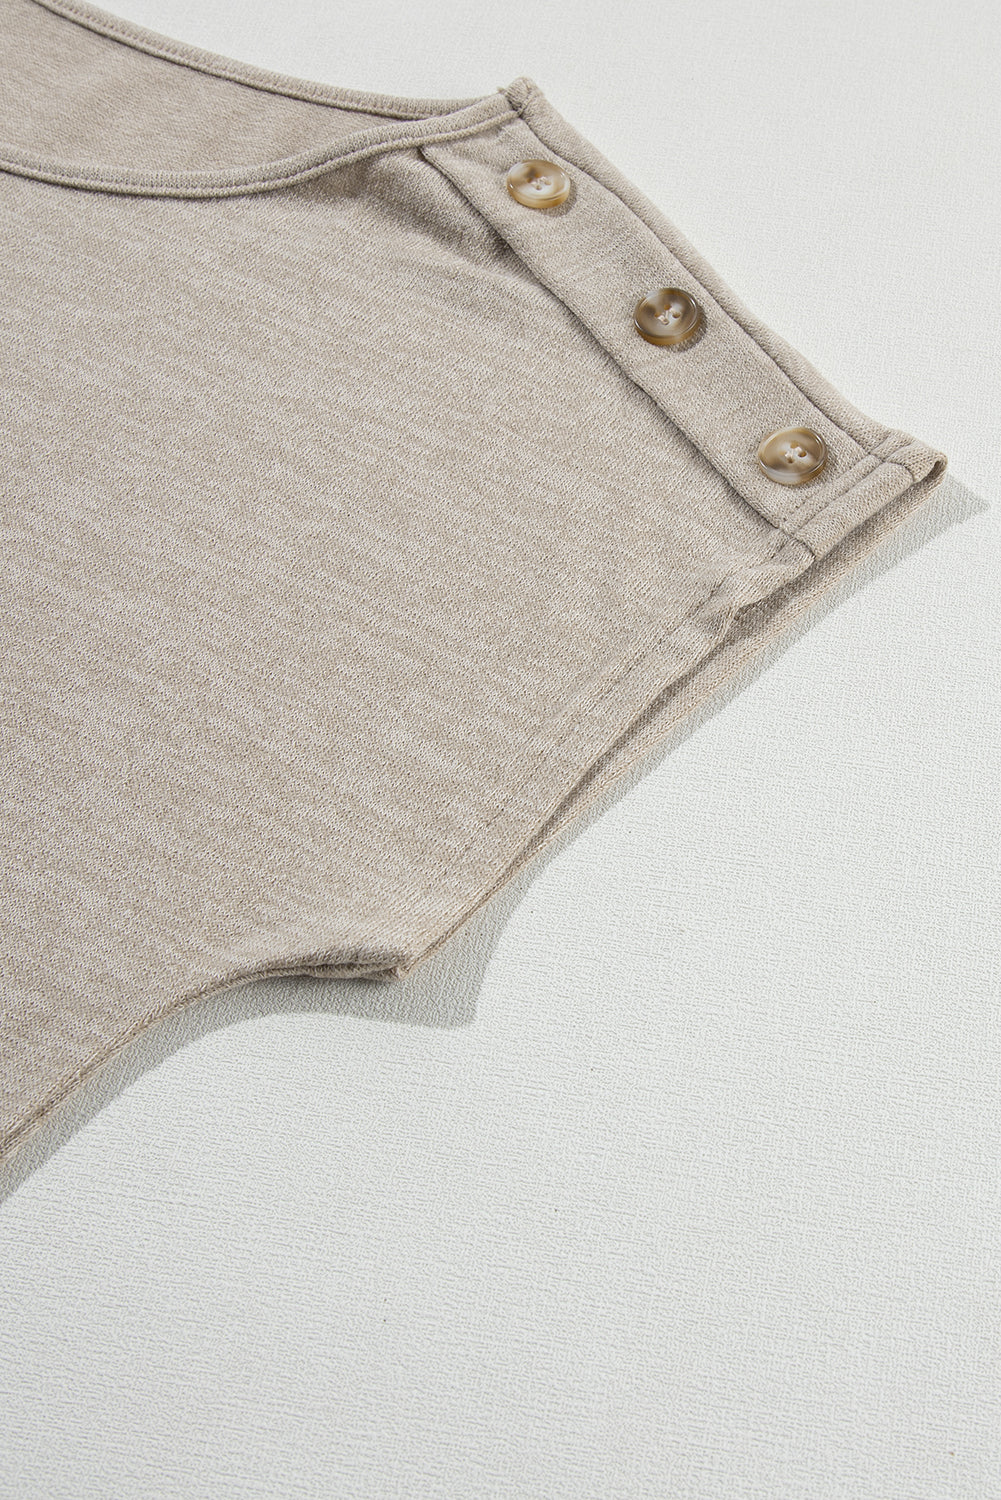 Smoke Gray Button Detail Batwing Sleeve Casual Tee